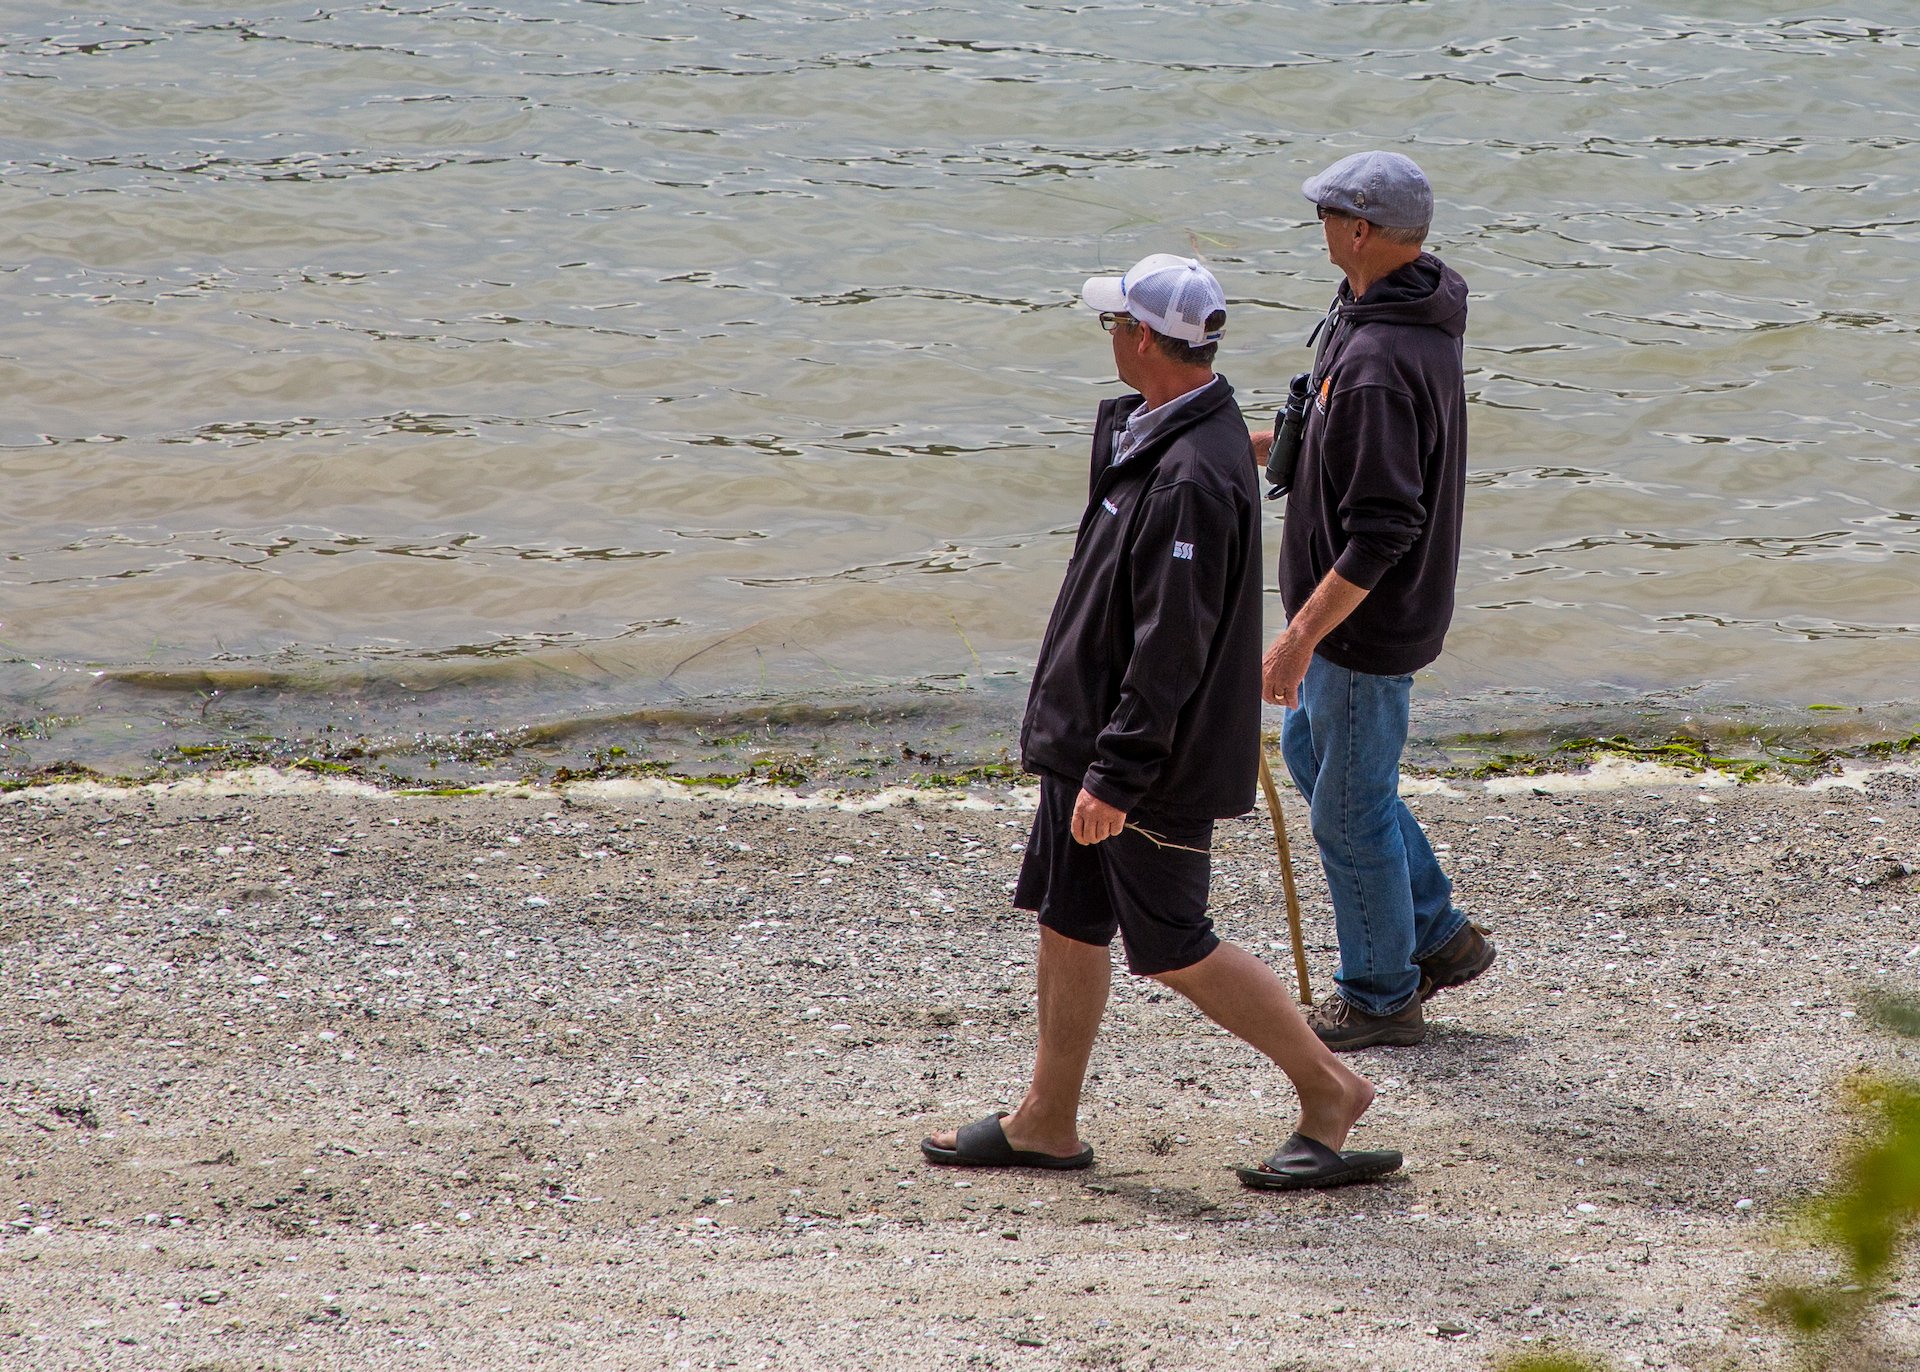  Shawn and Dad walking on the beach. 